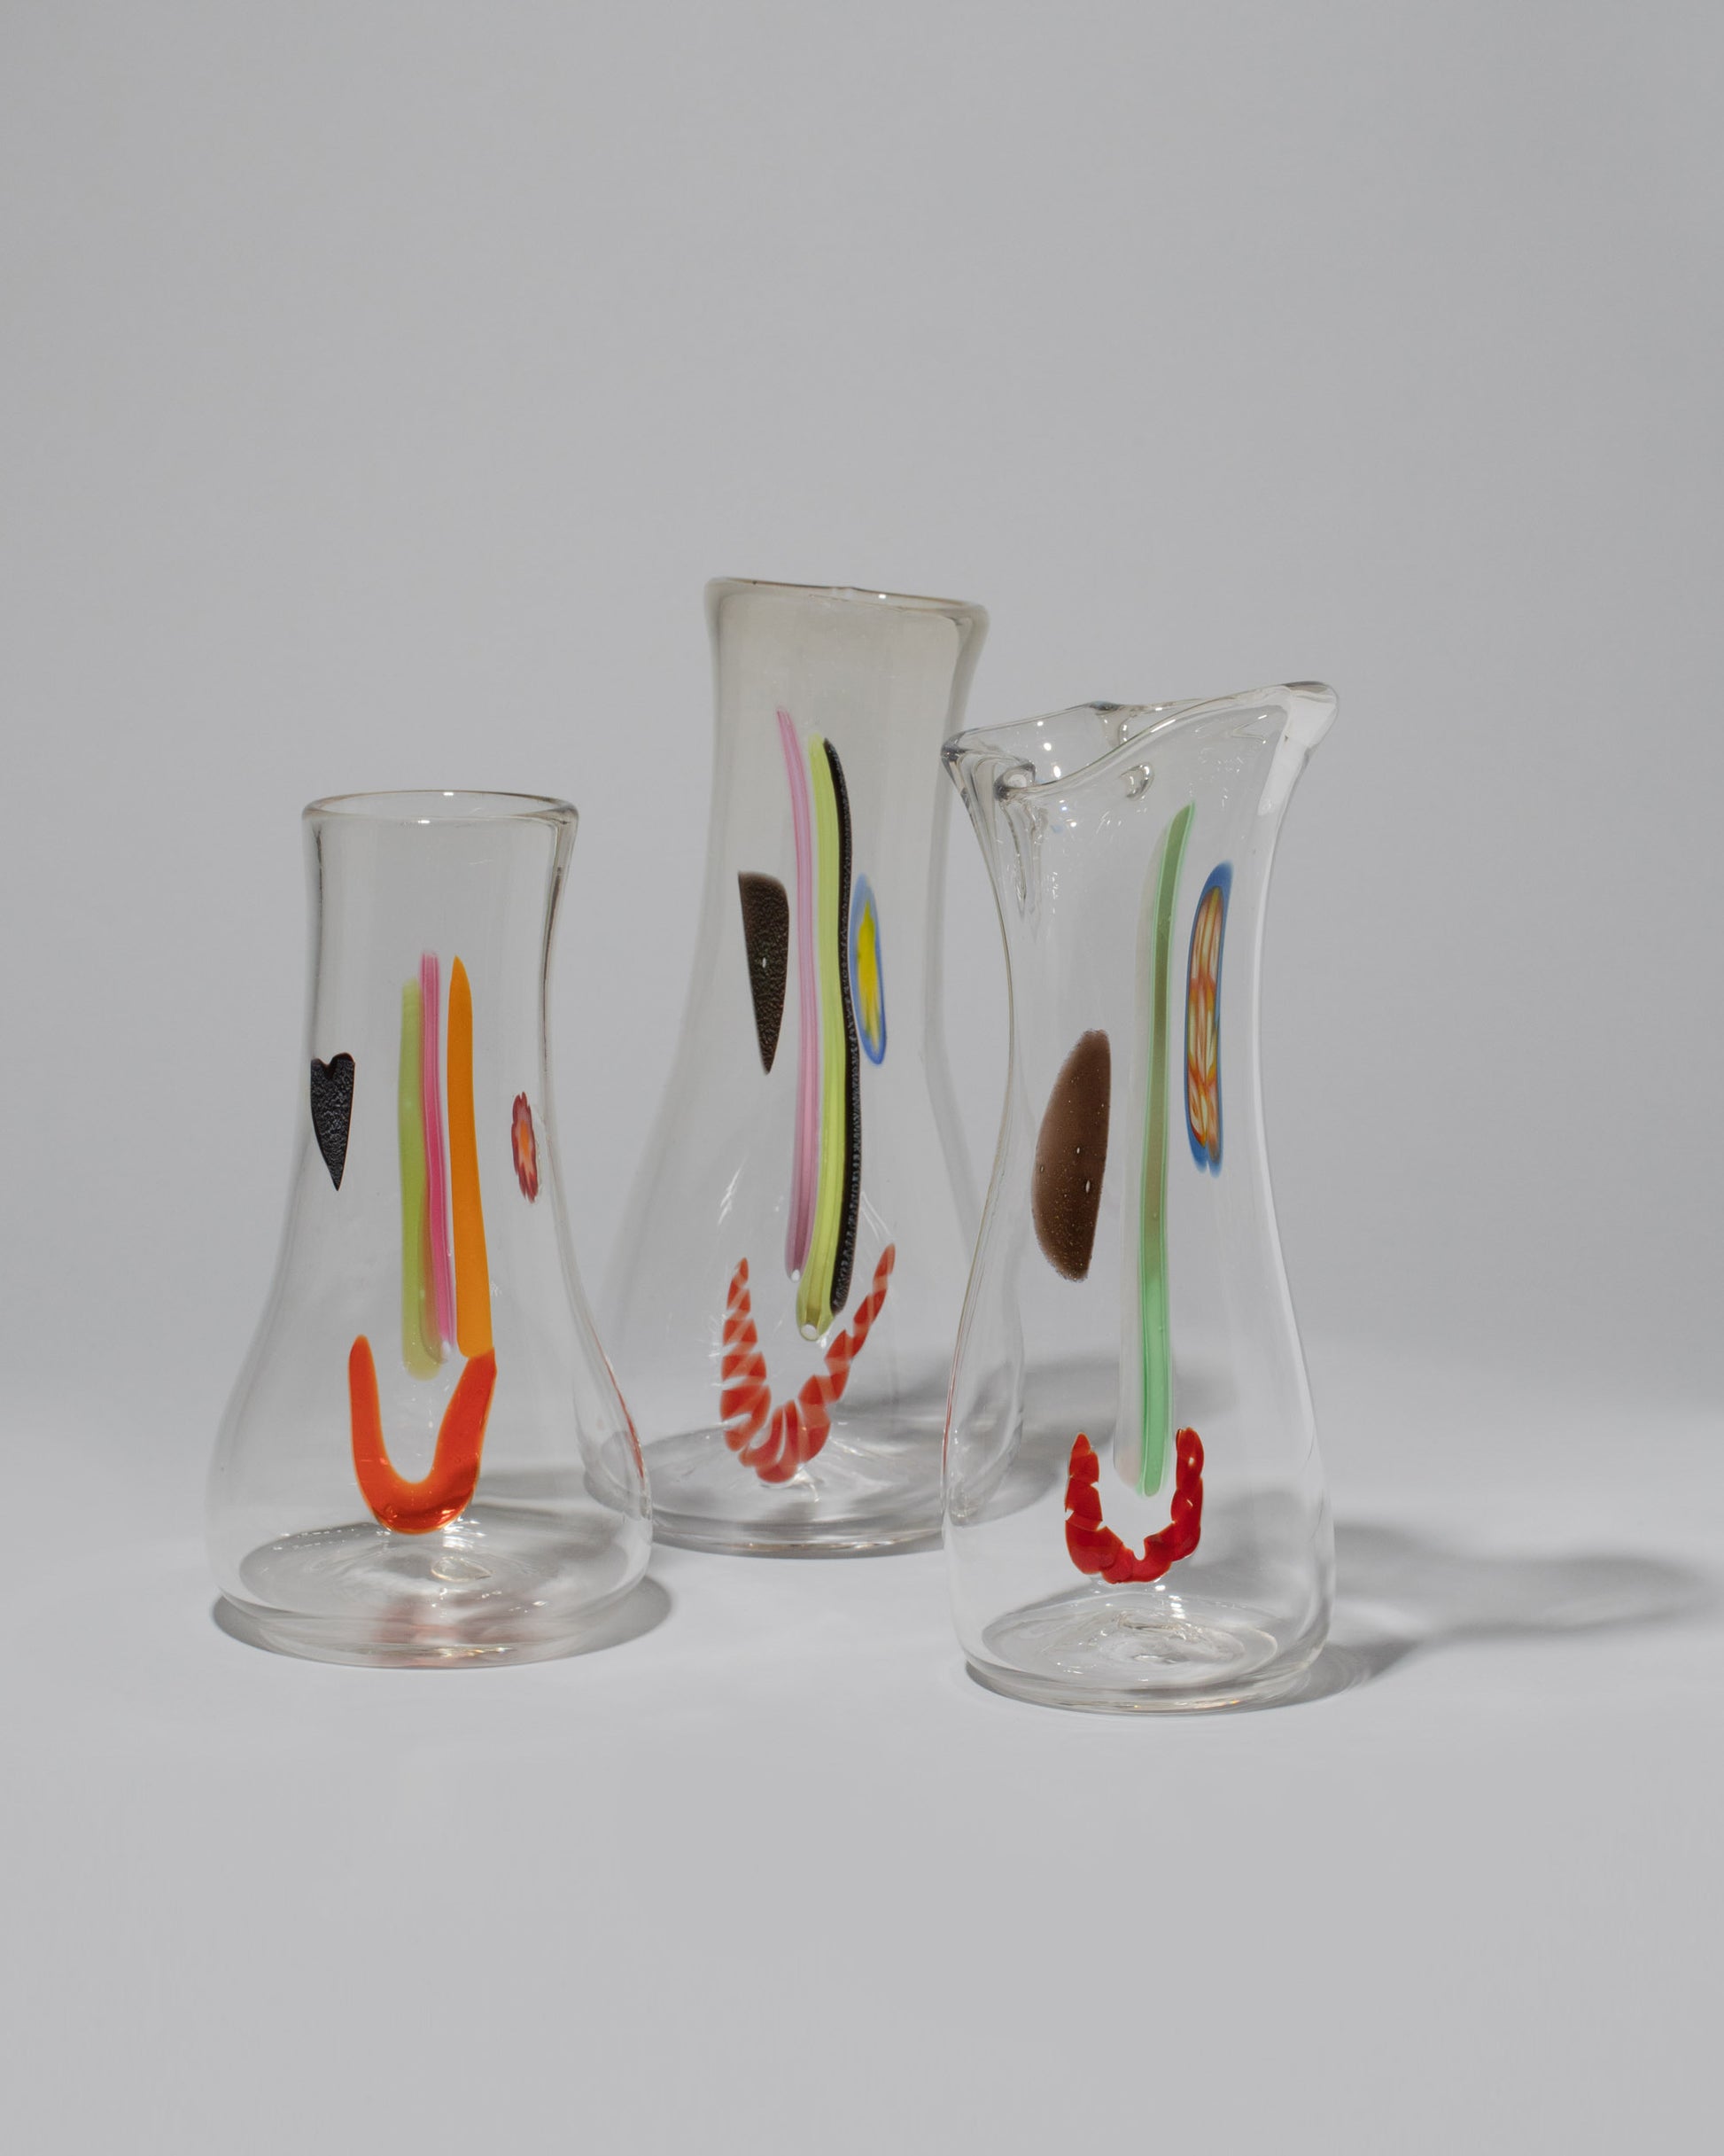 Group of FACEVESSEL Clear Mega Face Vases on light color background.